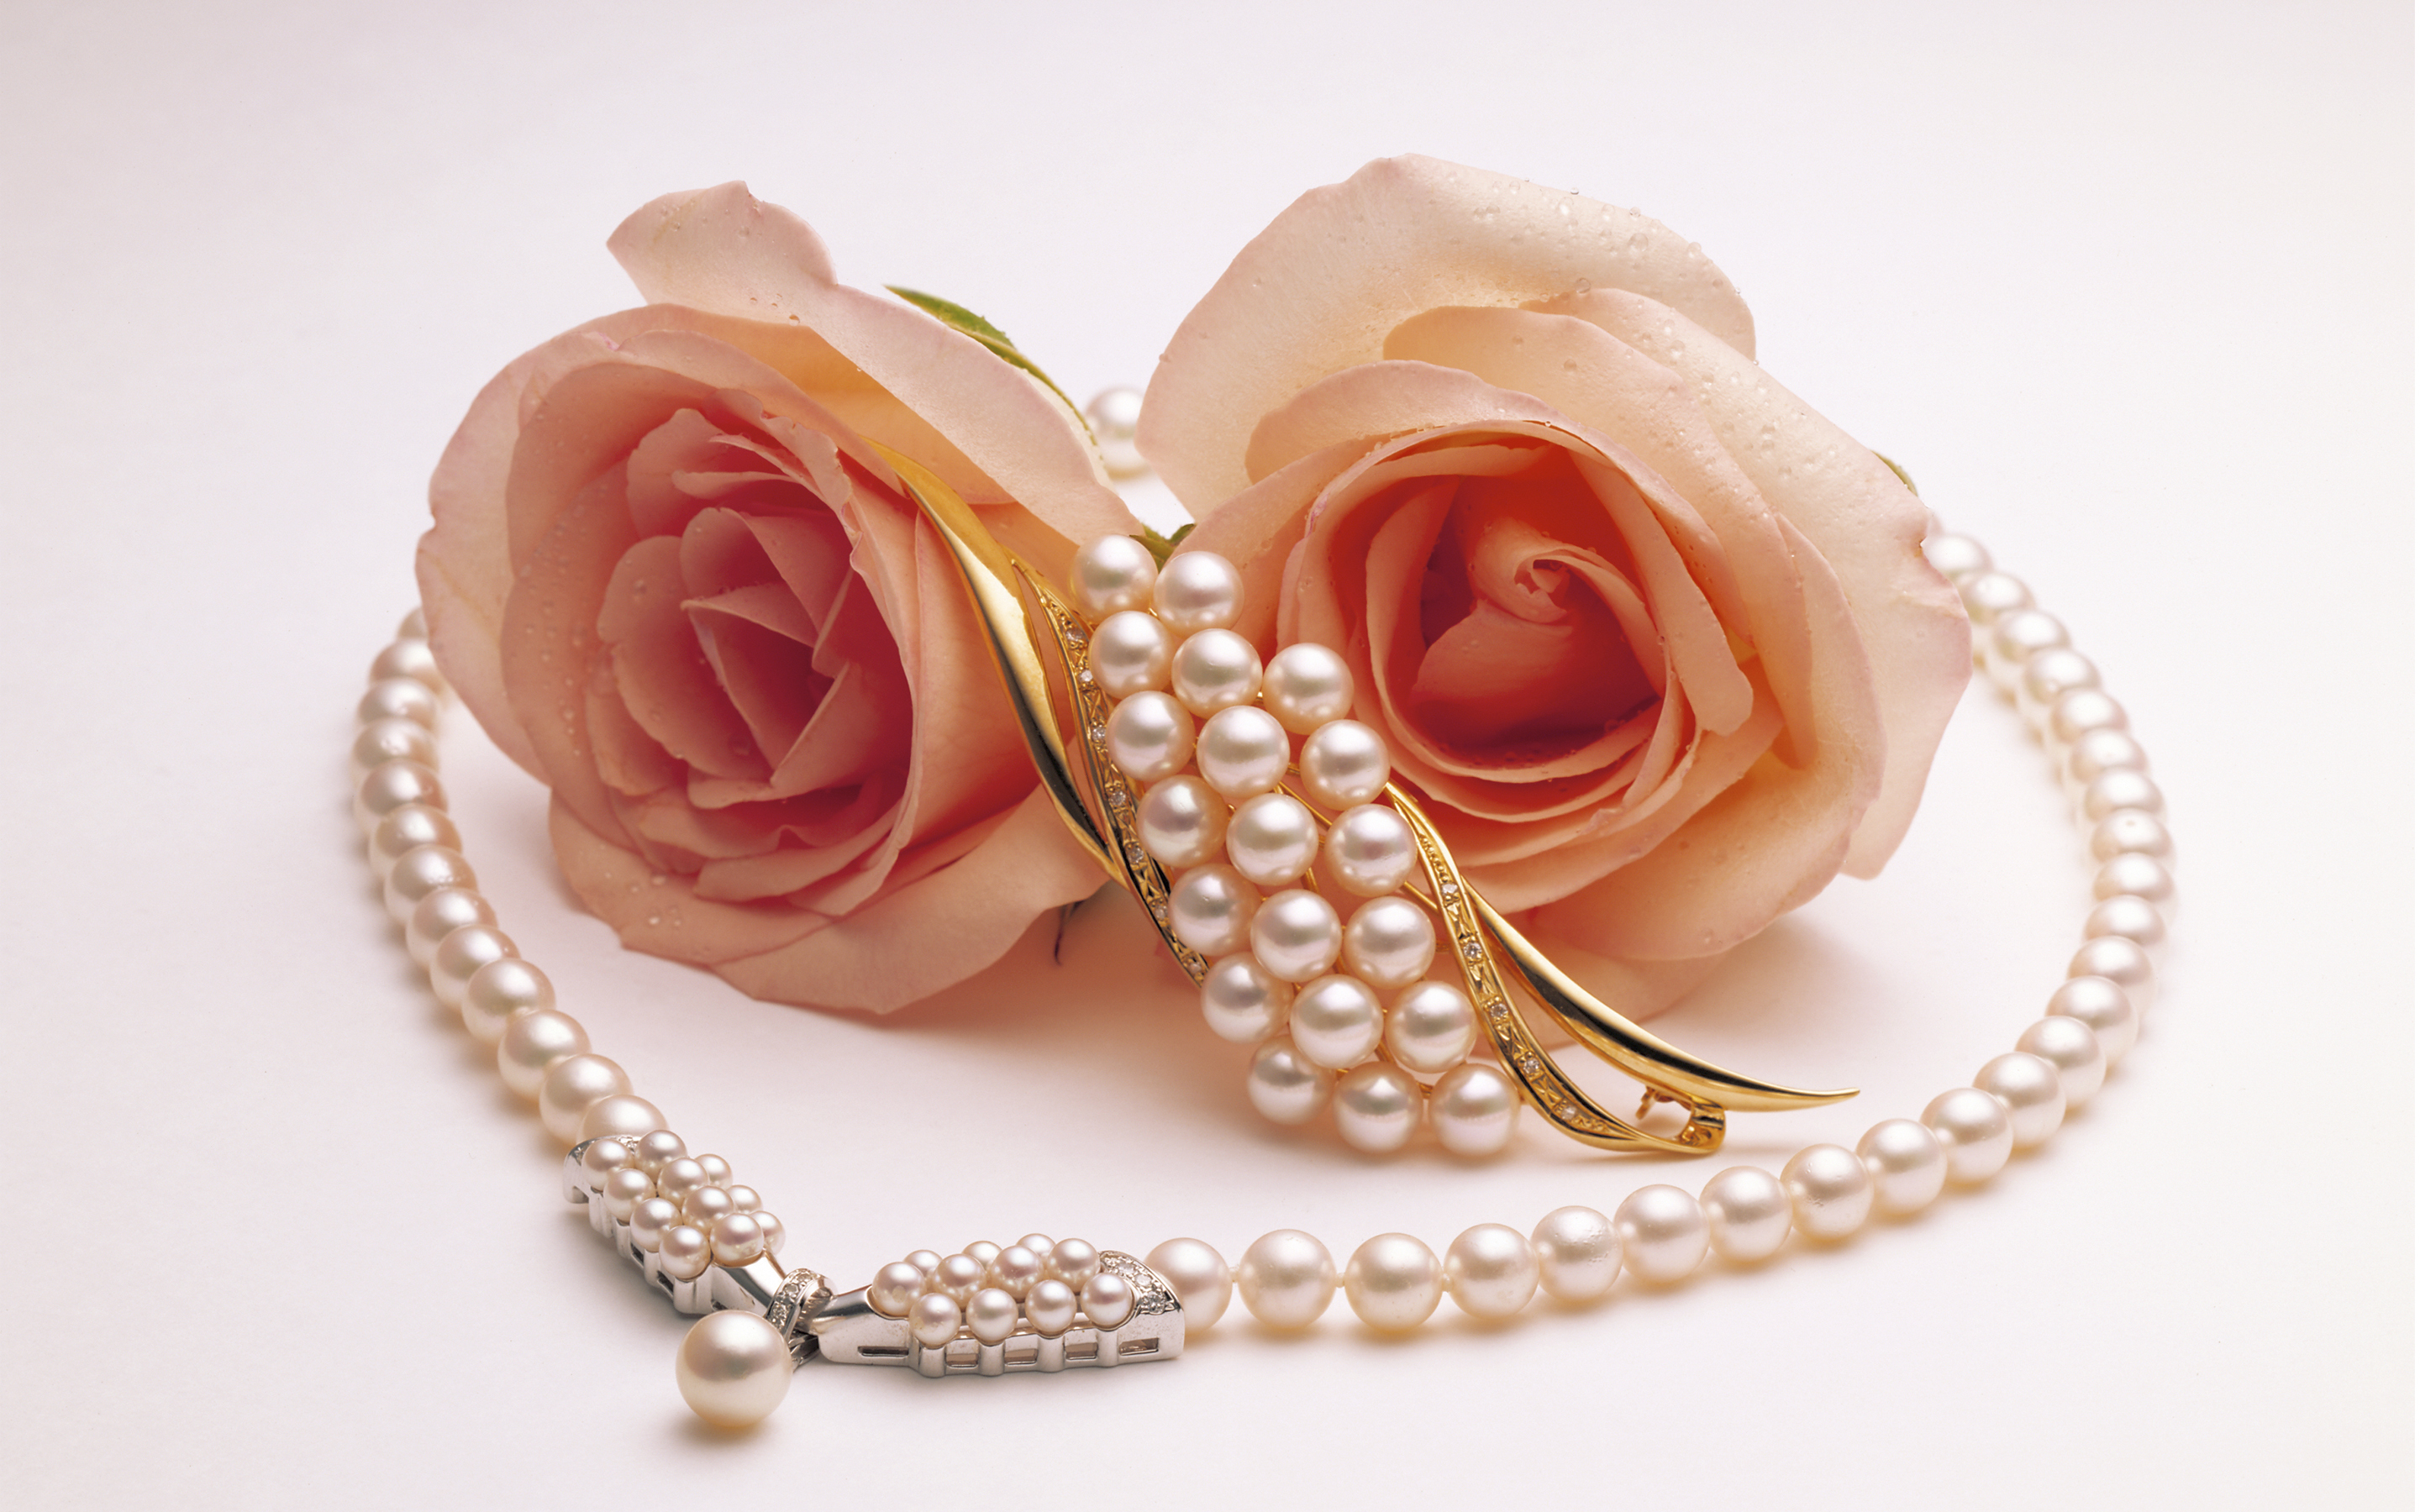 Wallpaper two roses pearls brooches wallpapers flowers   download